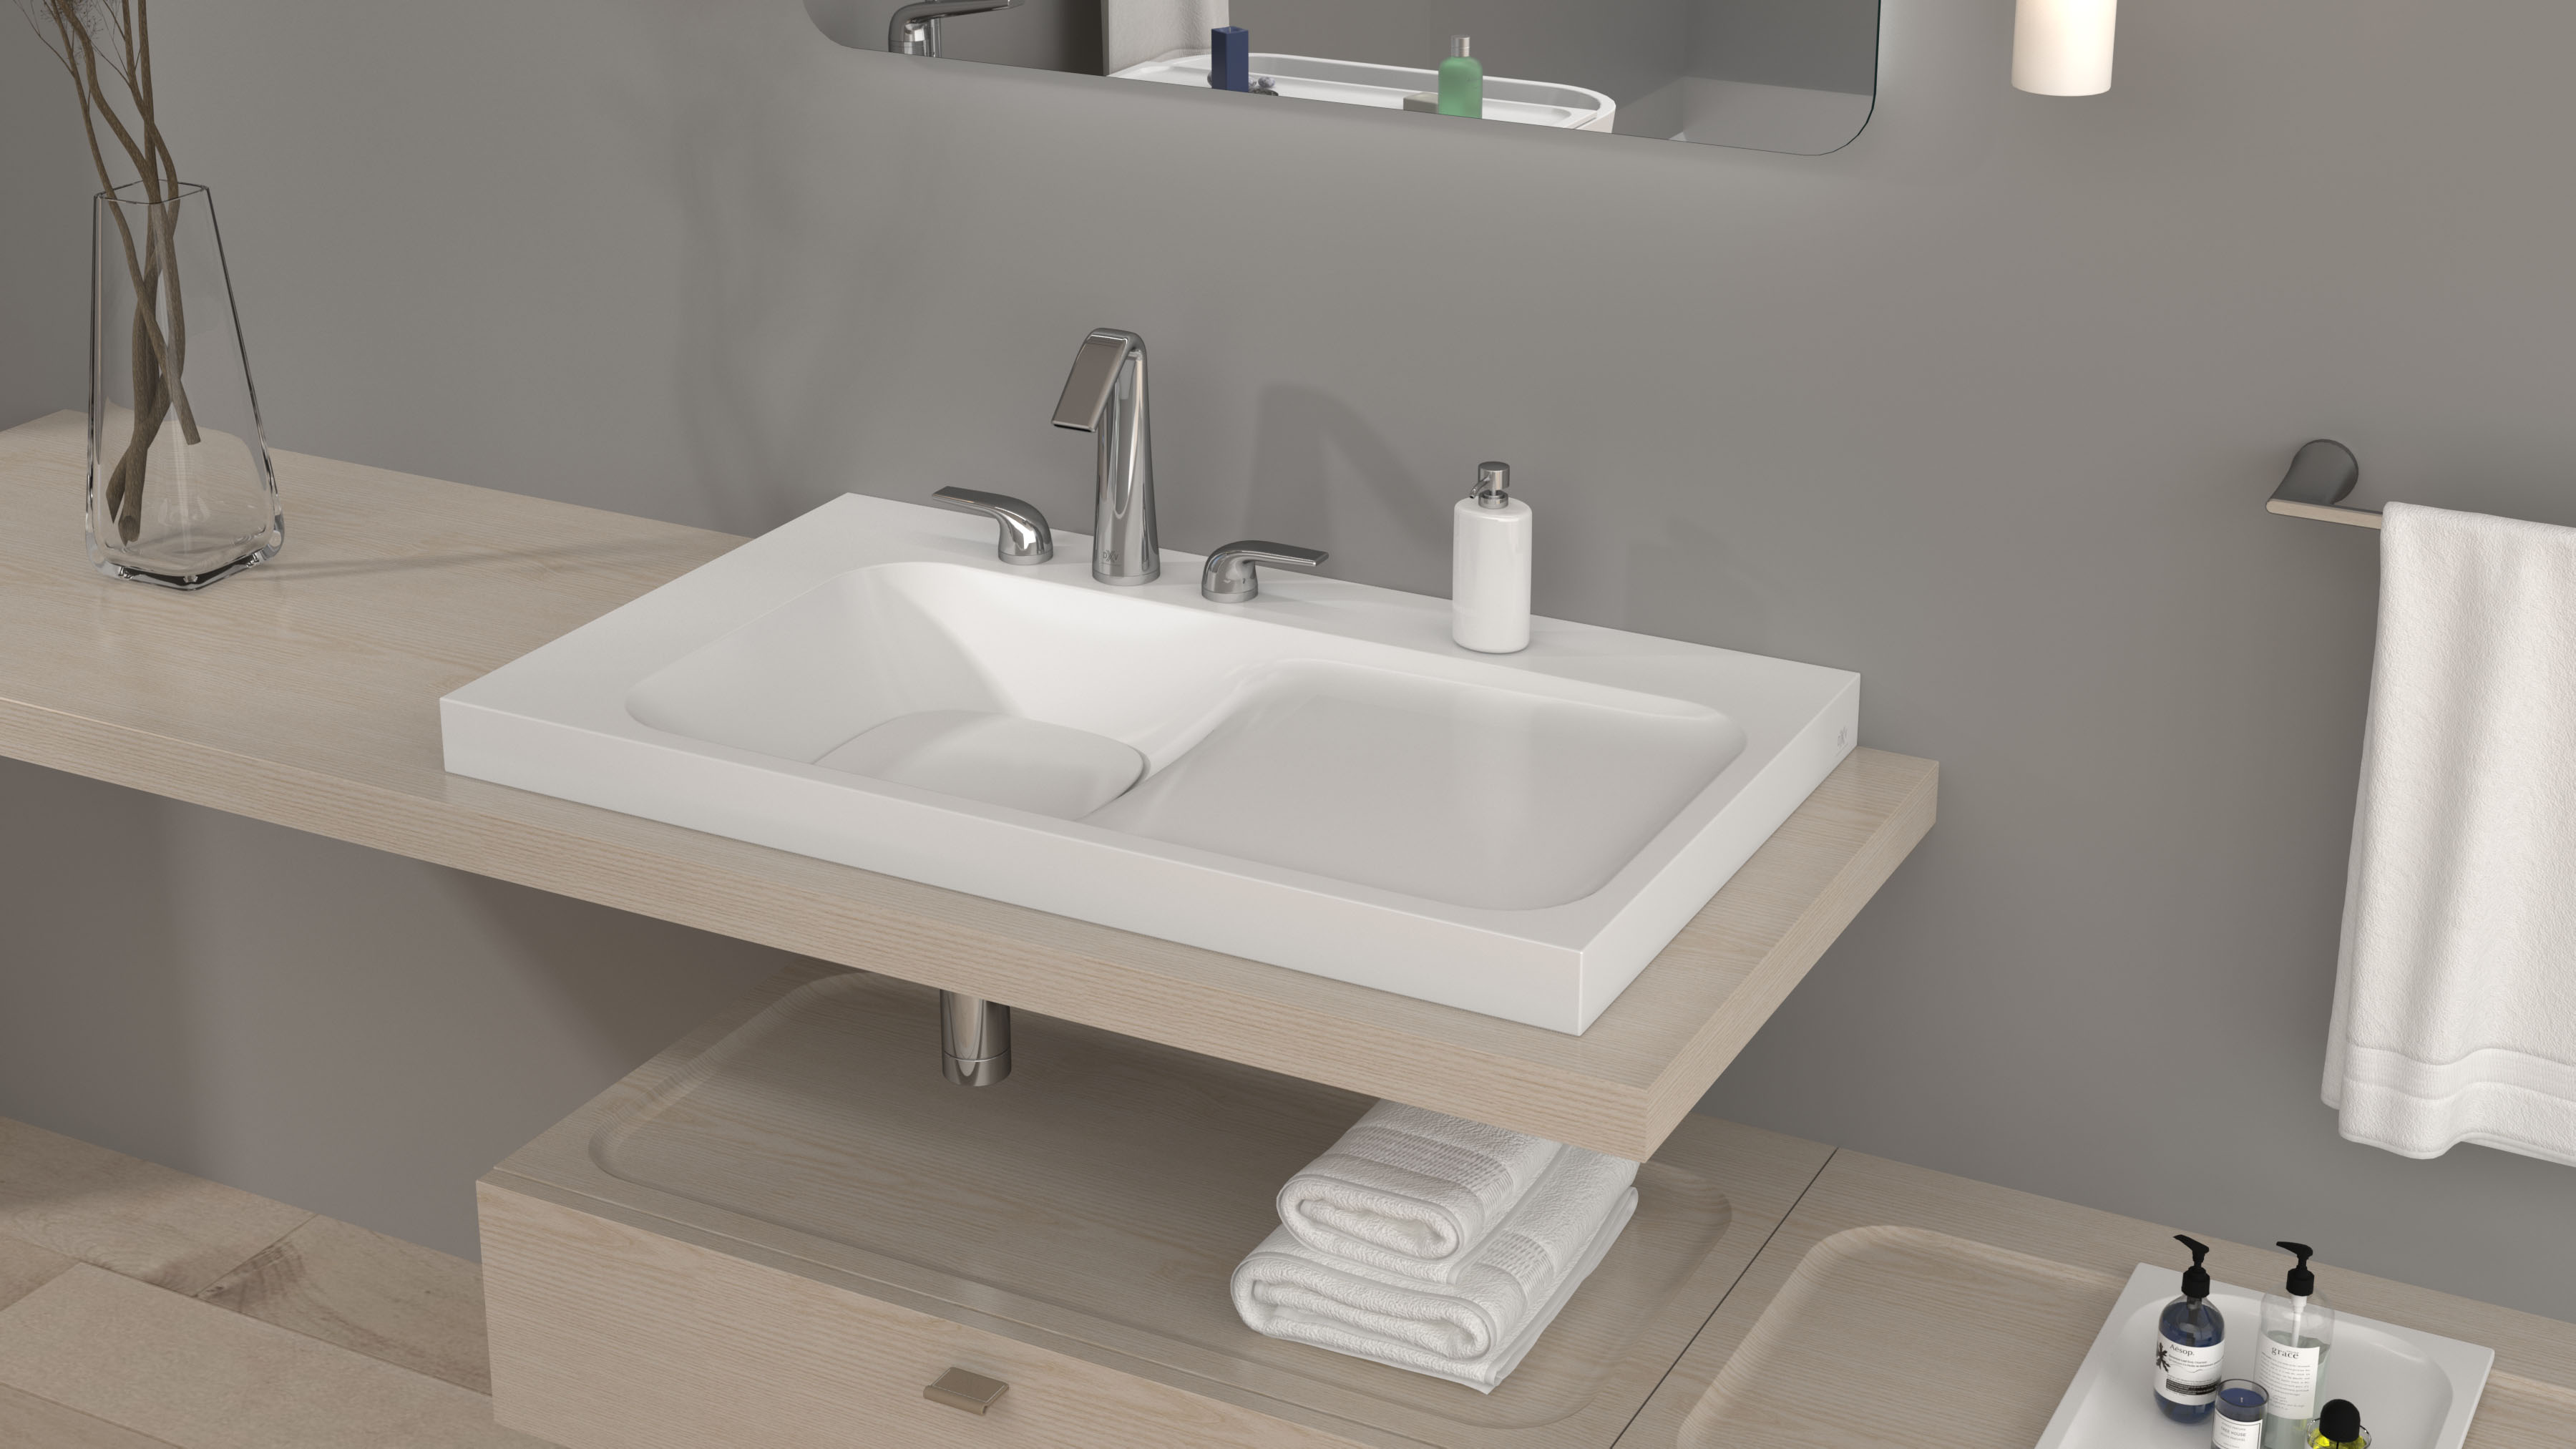 DXV Modulus® Above Counte Sink, 3-Hole